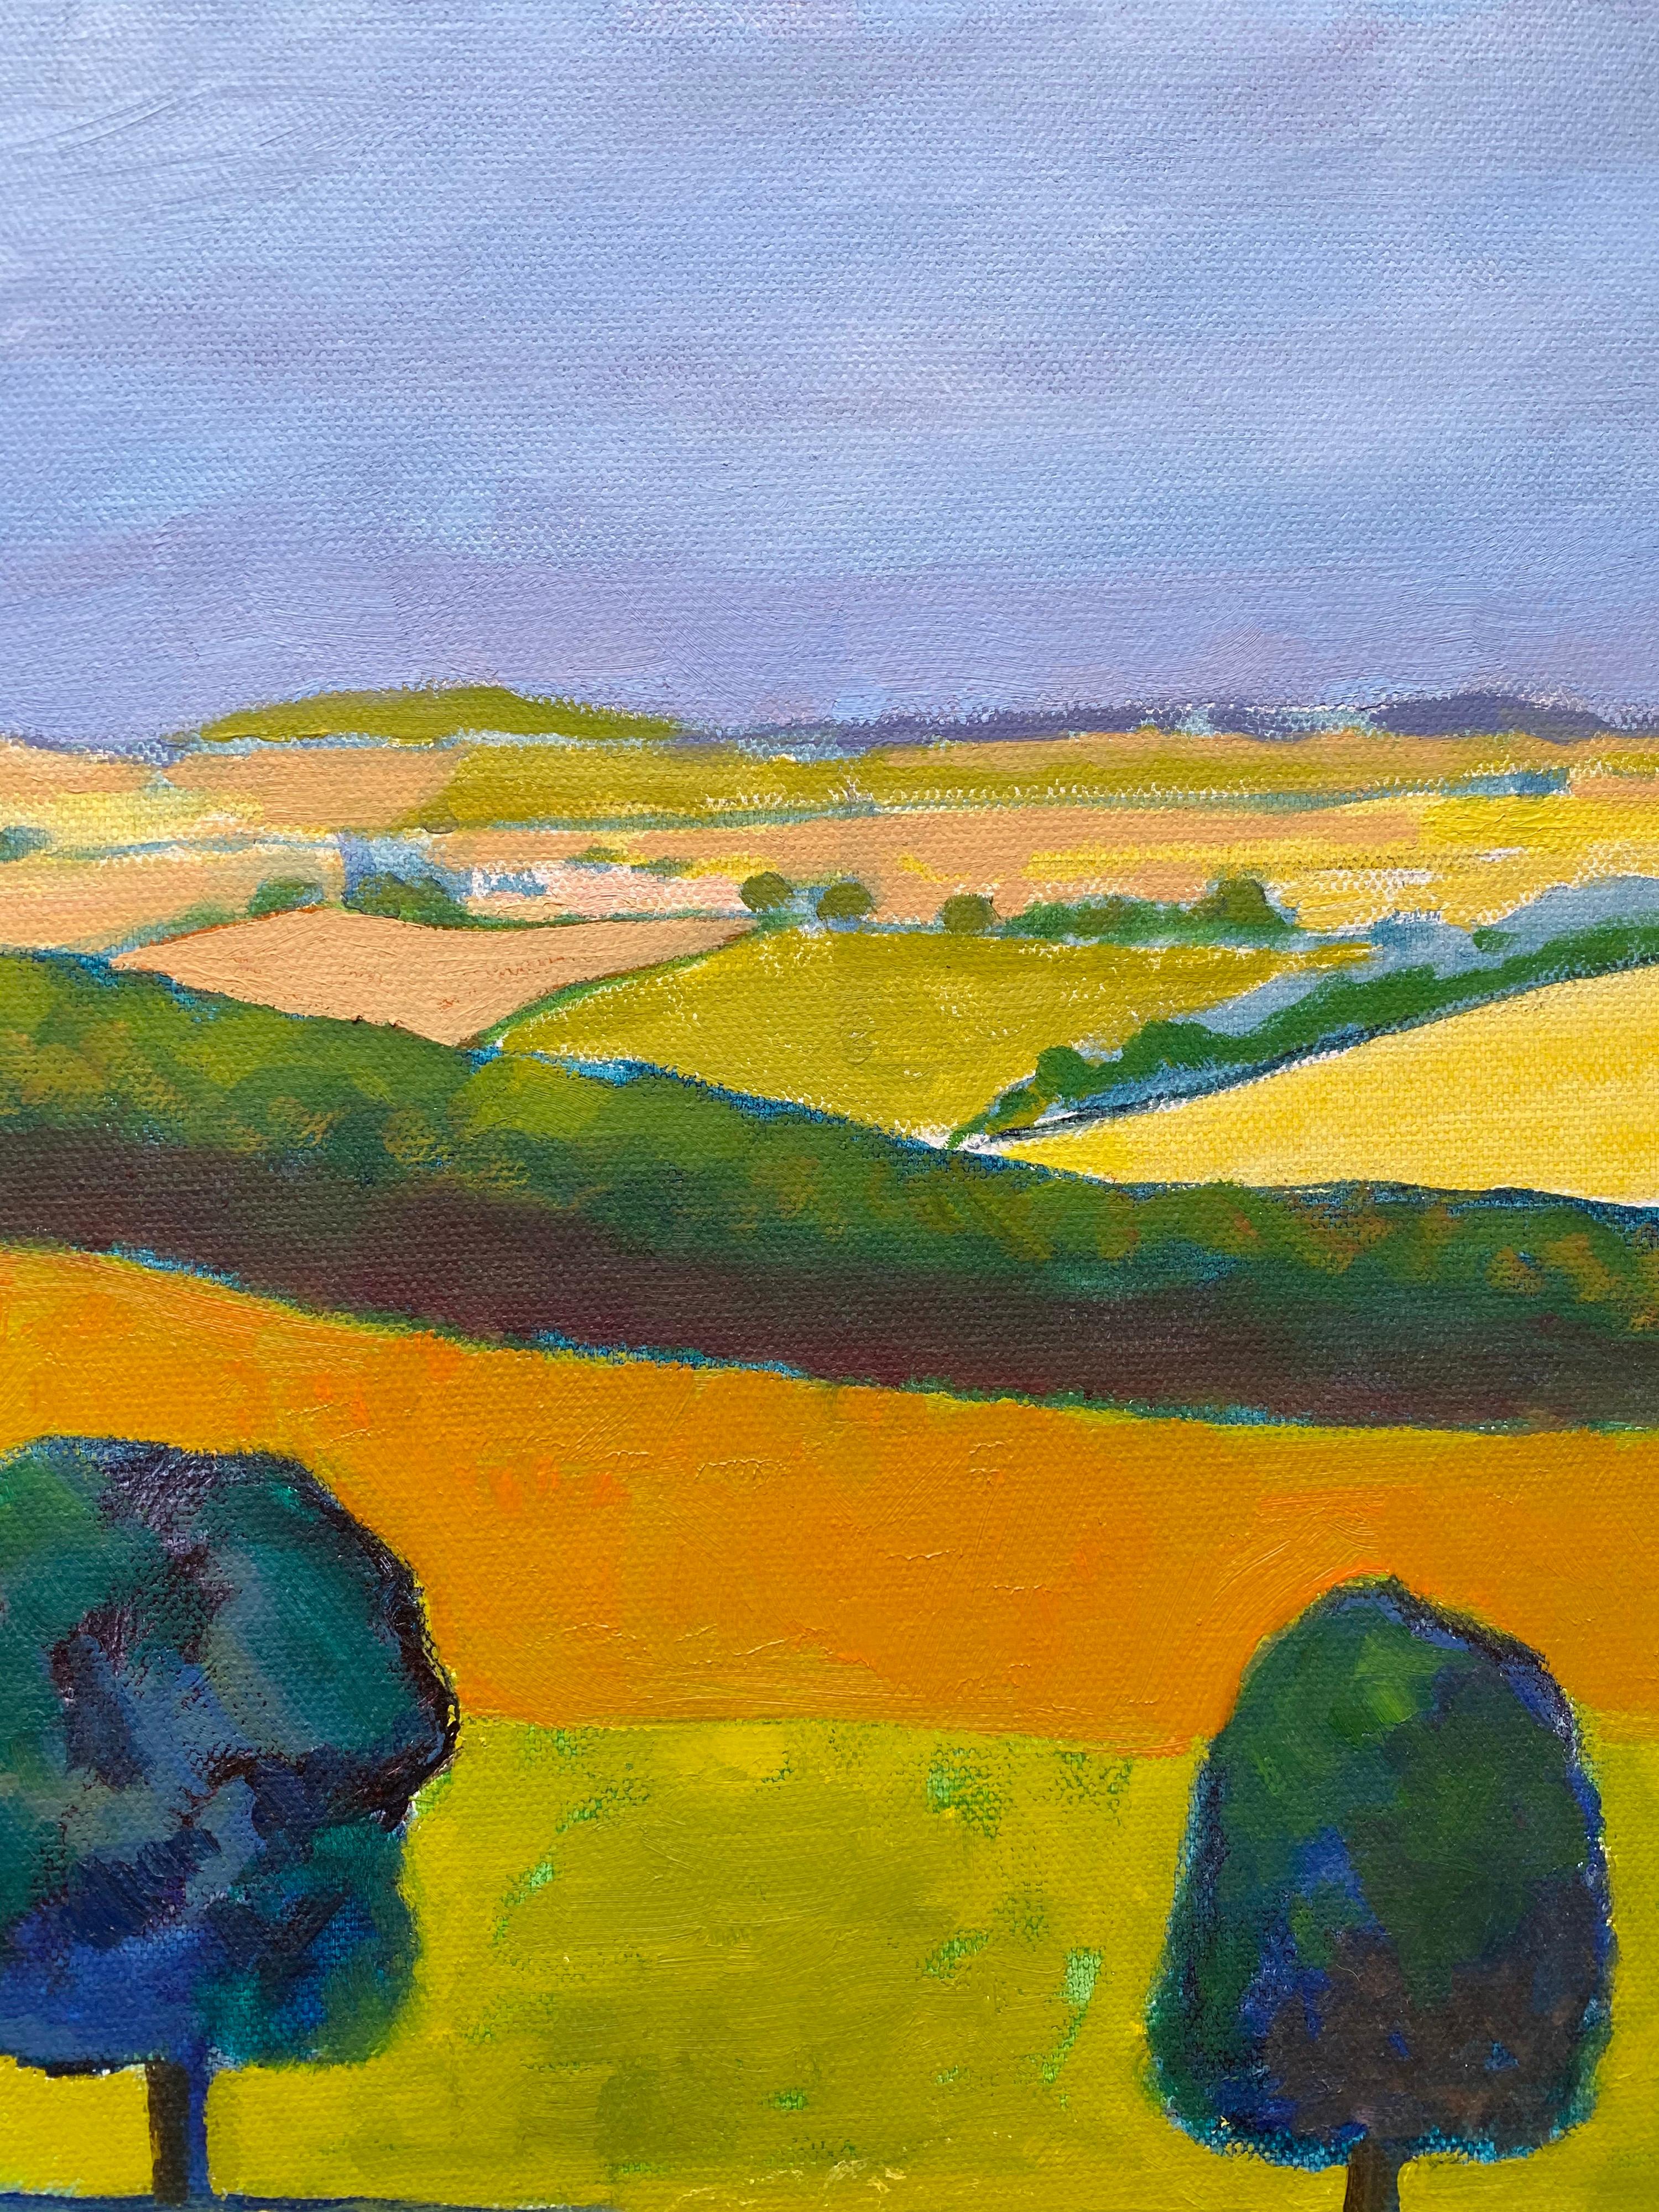 ''Golden Landscape'
by Michael Haswell (British, 1931-2020)
inscribed verso
acrylic painting on box canvas (painted edges so do not require framing)
canvas measures: 20 x 20 inches

provenance: all the paintings we currently have for sale have come